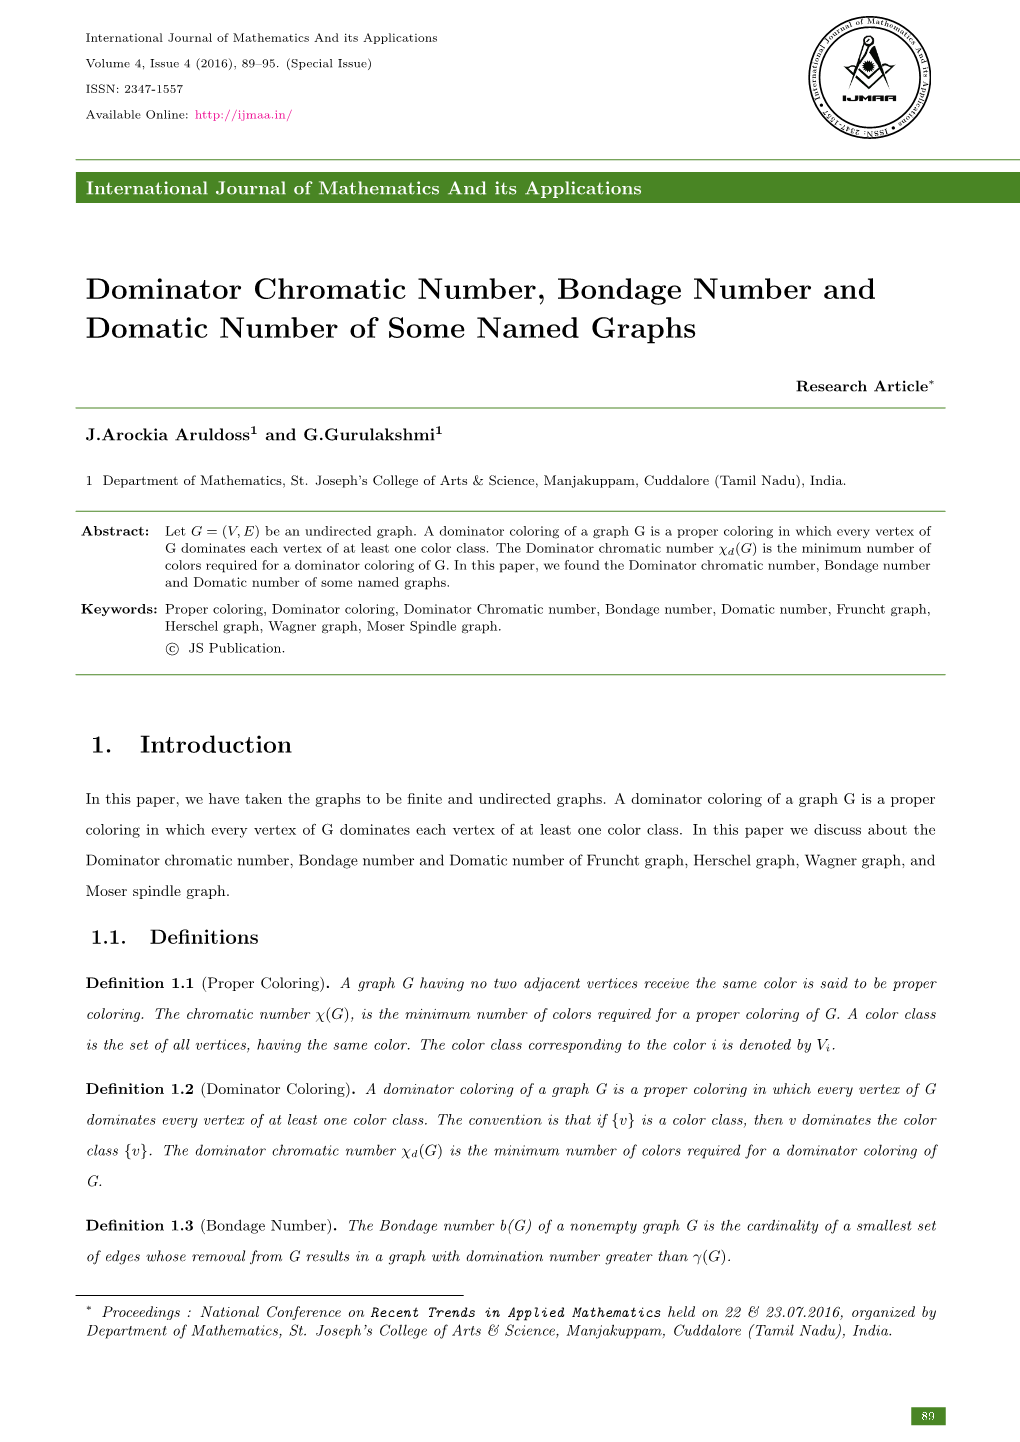 Dominator Chromatic Number, Bondage Number and Domatic Number of Some Named Graphs